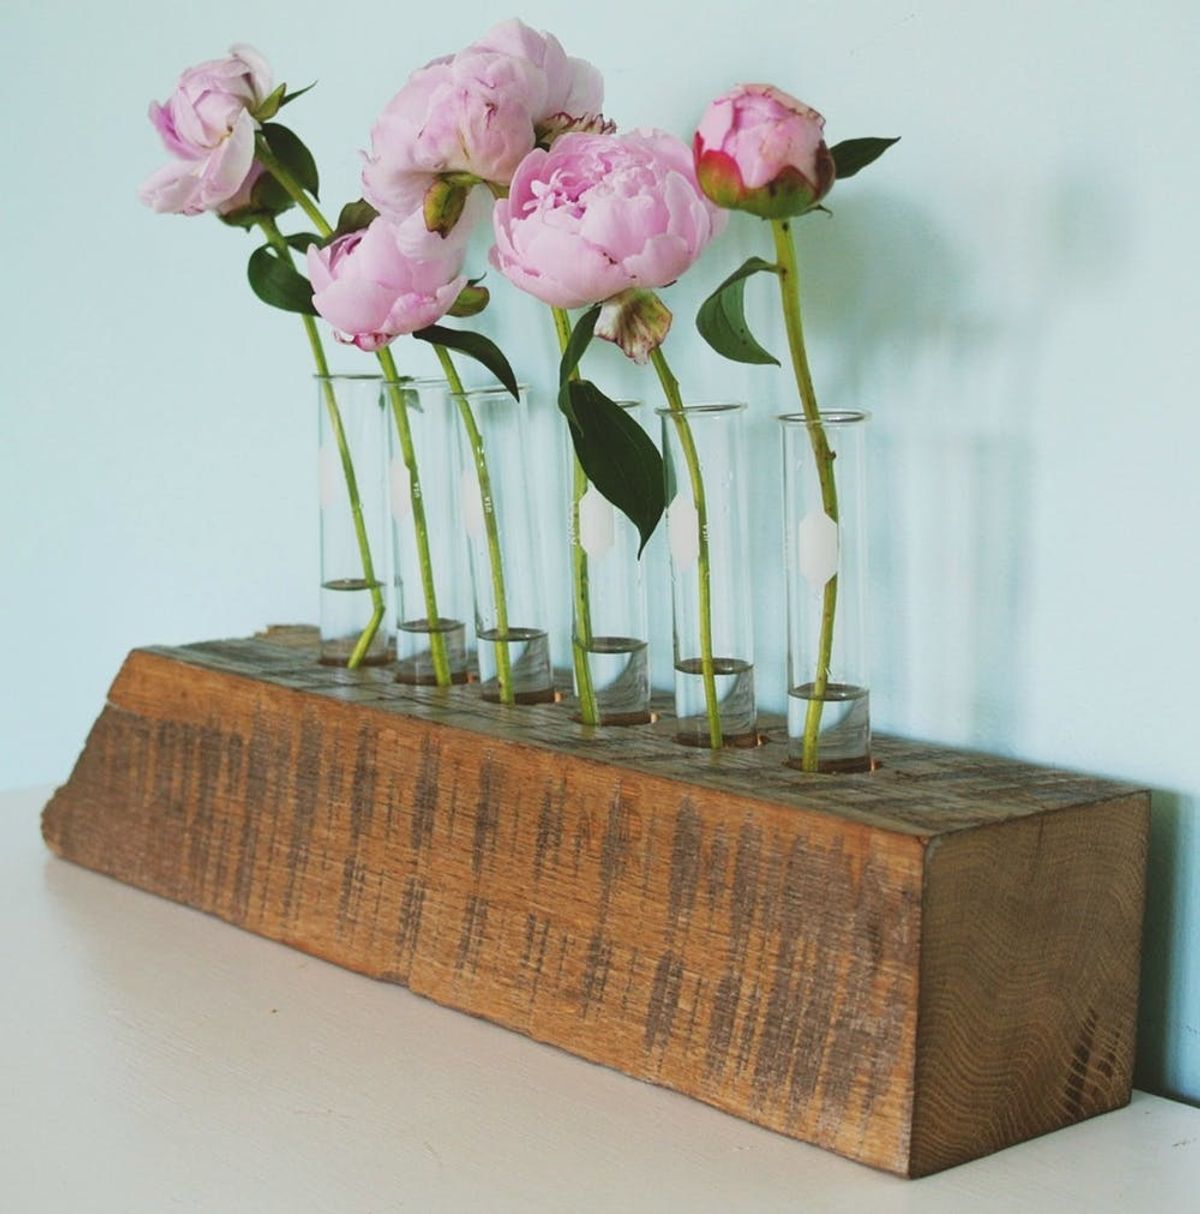 Shop-Class Chic: DIY Wood Projects for Women